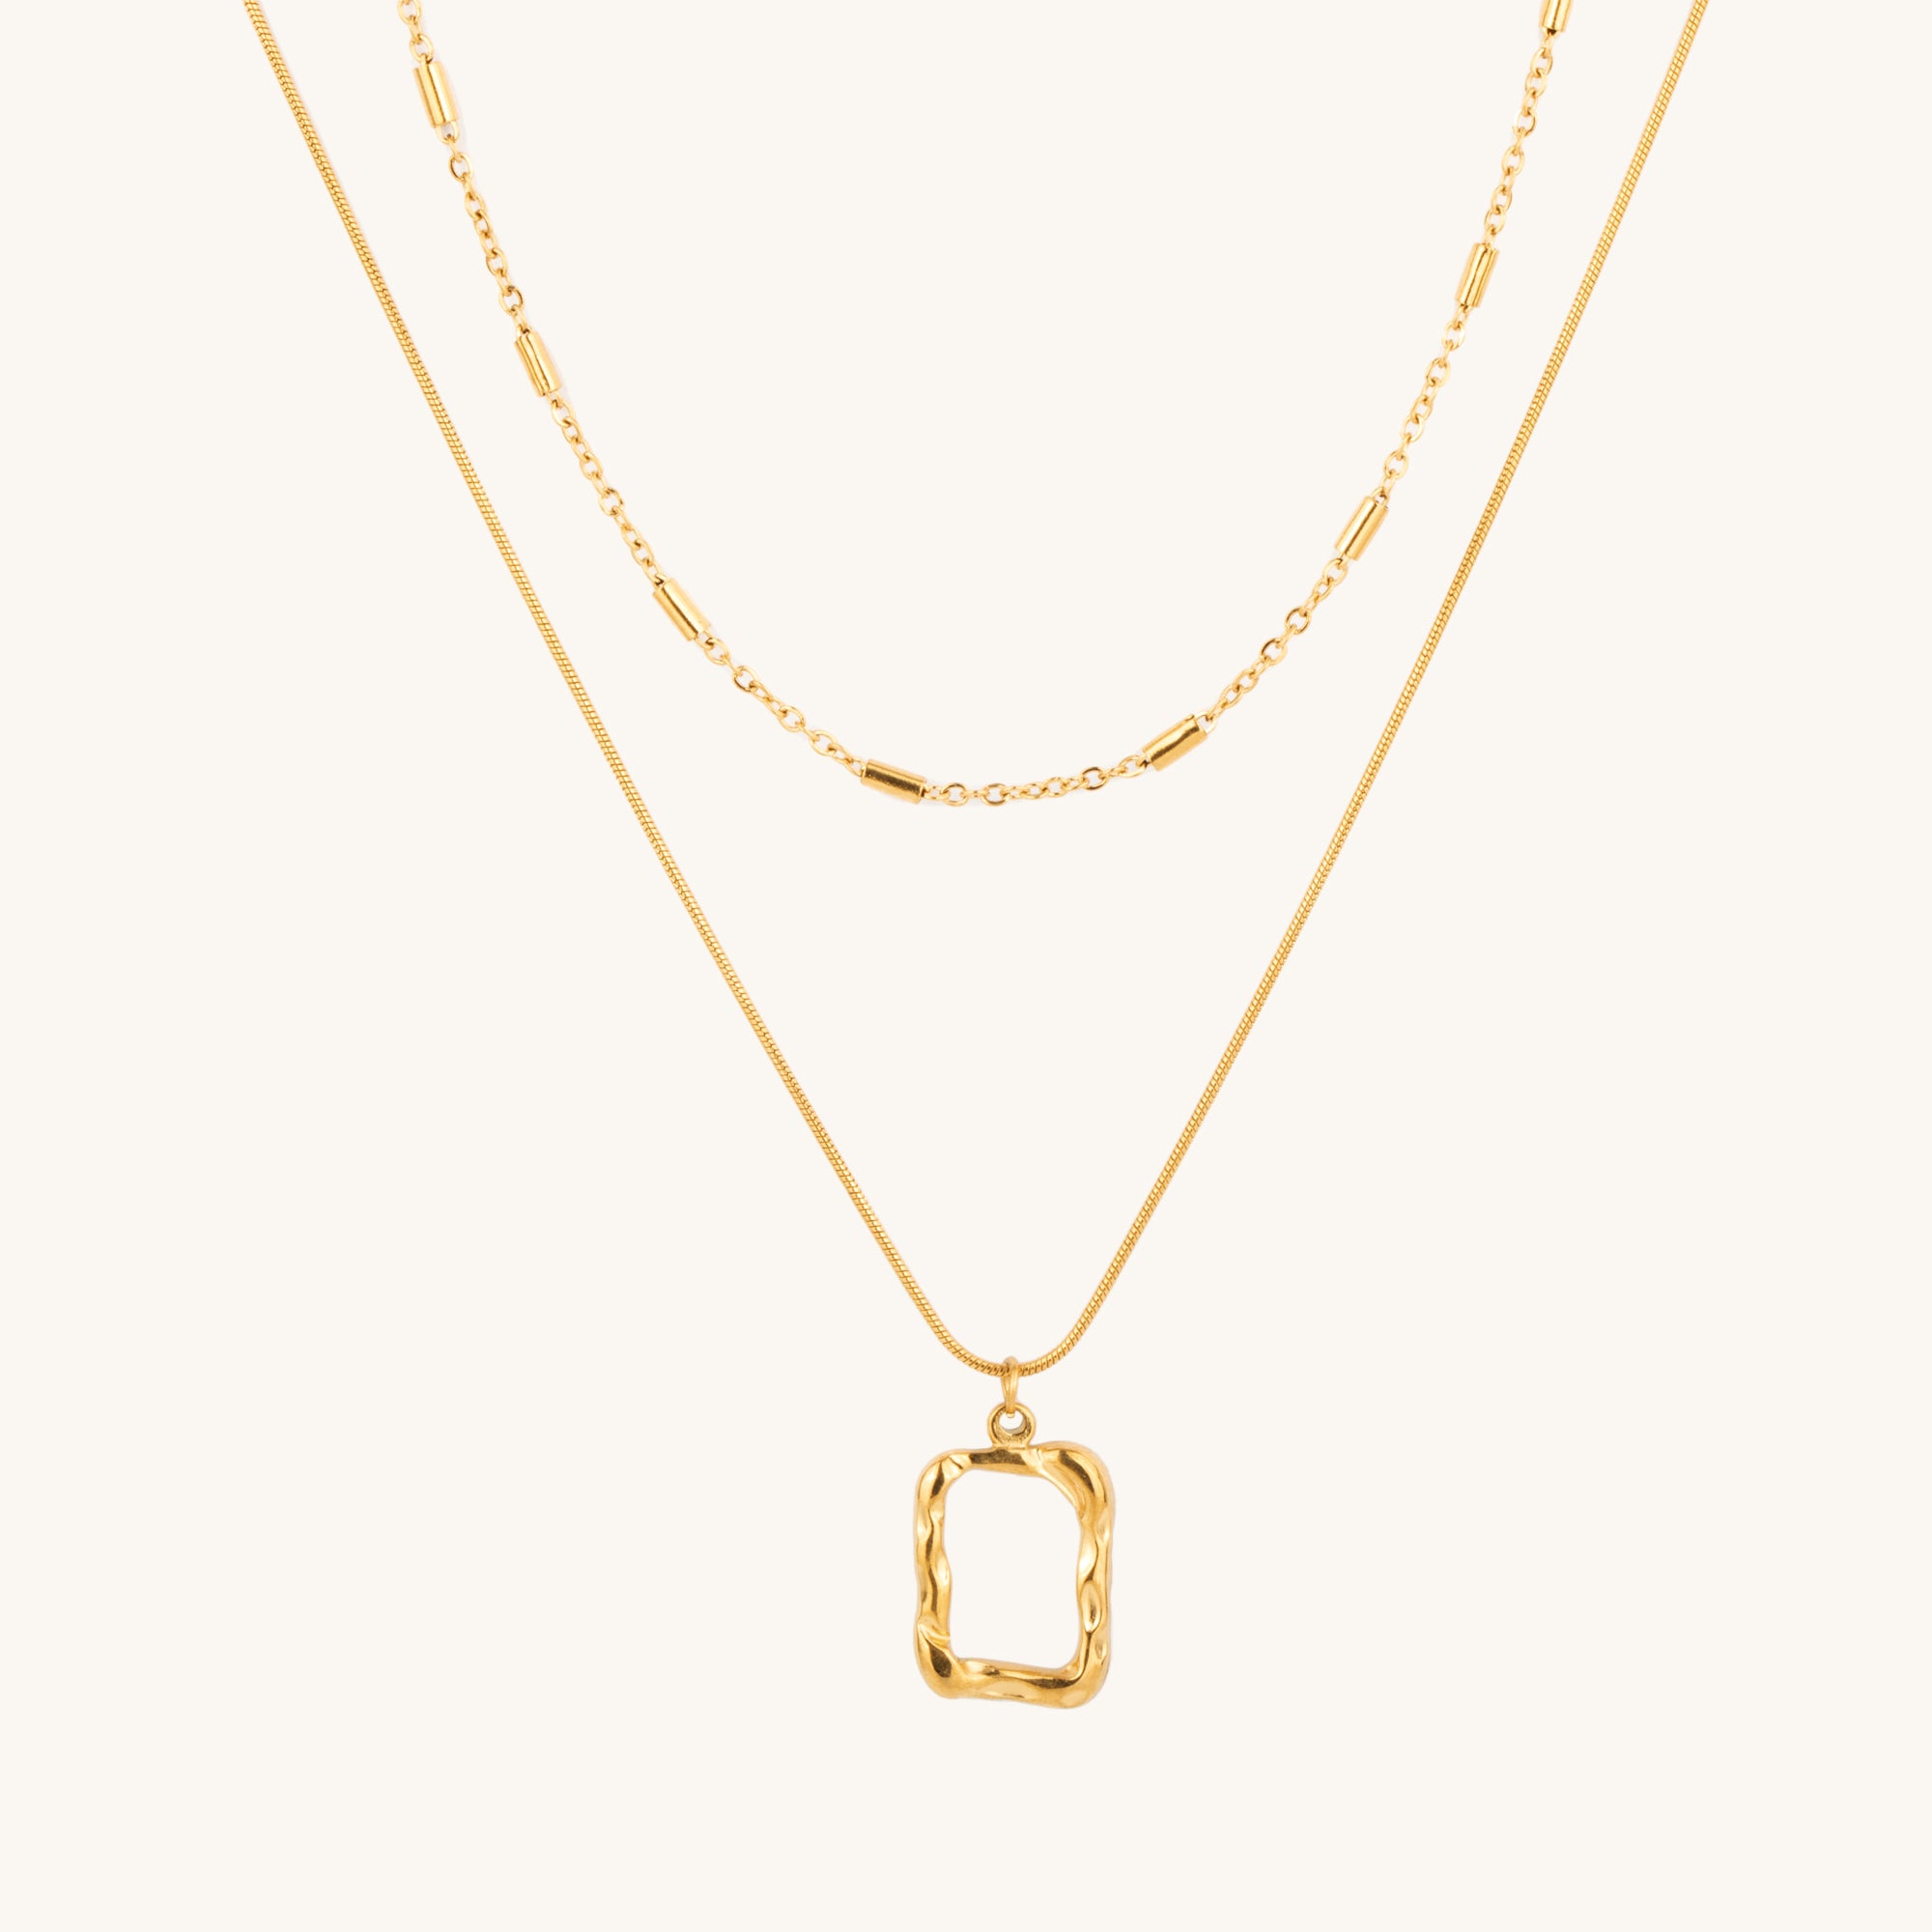 Dual Chain Golden Gate Necklace